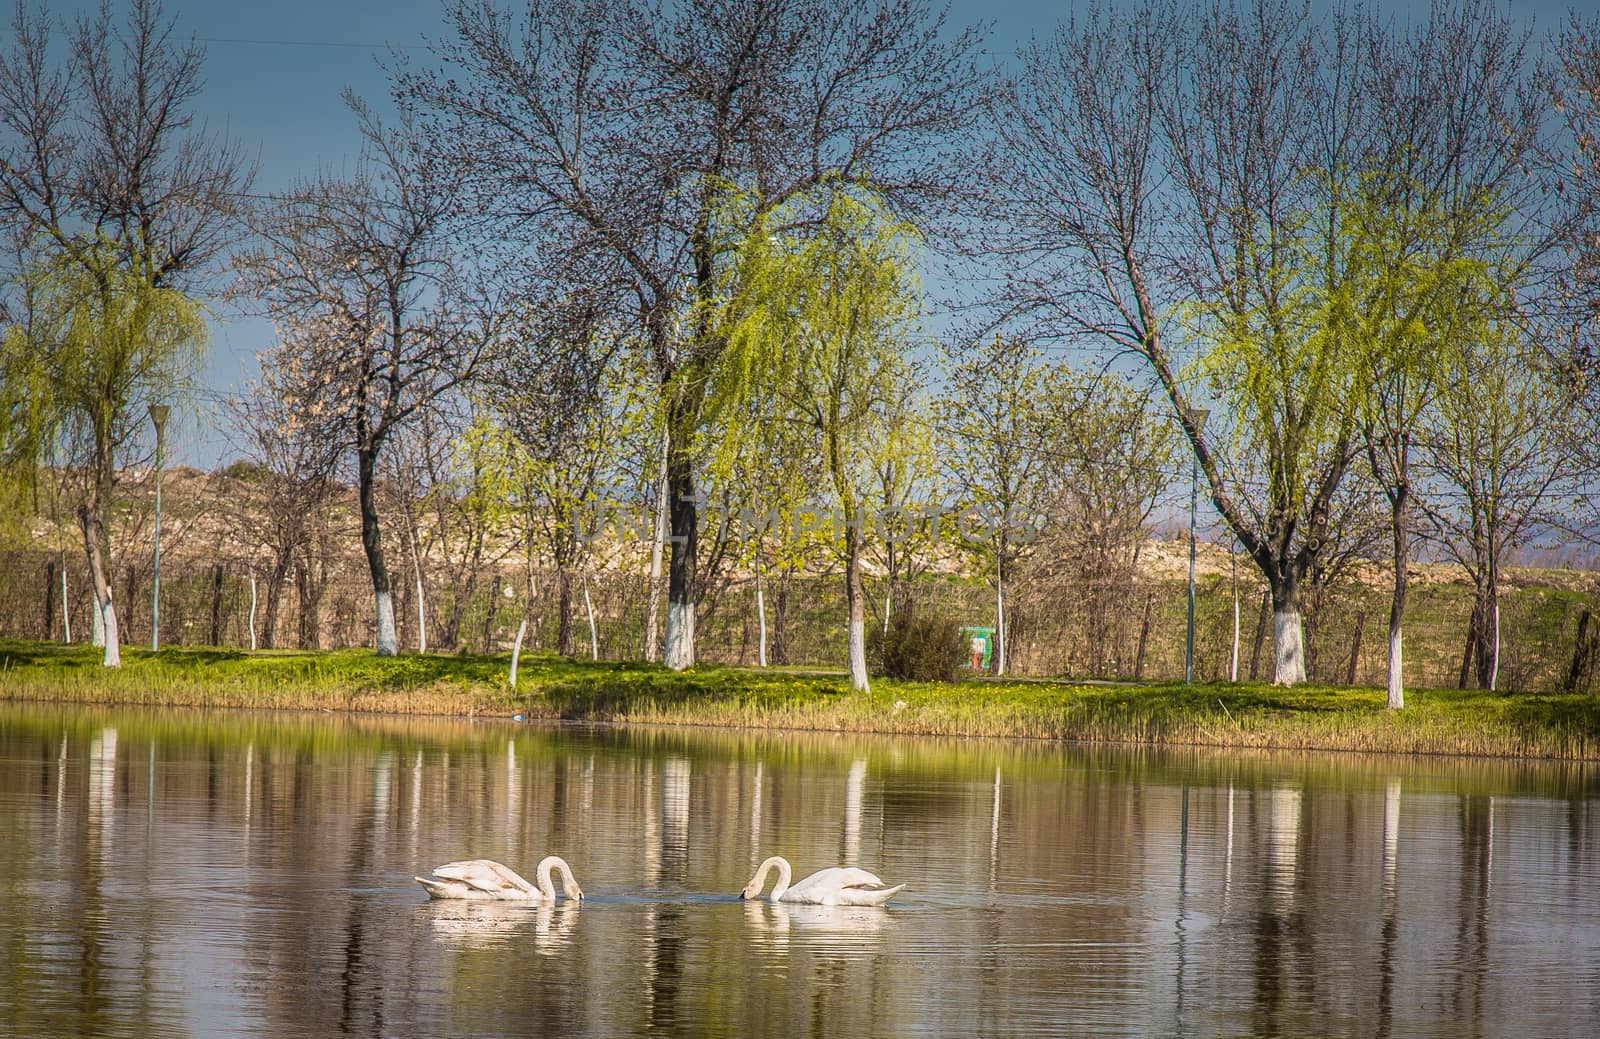 Swans on the lake by sonyc